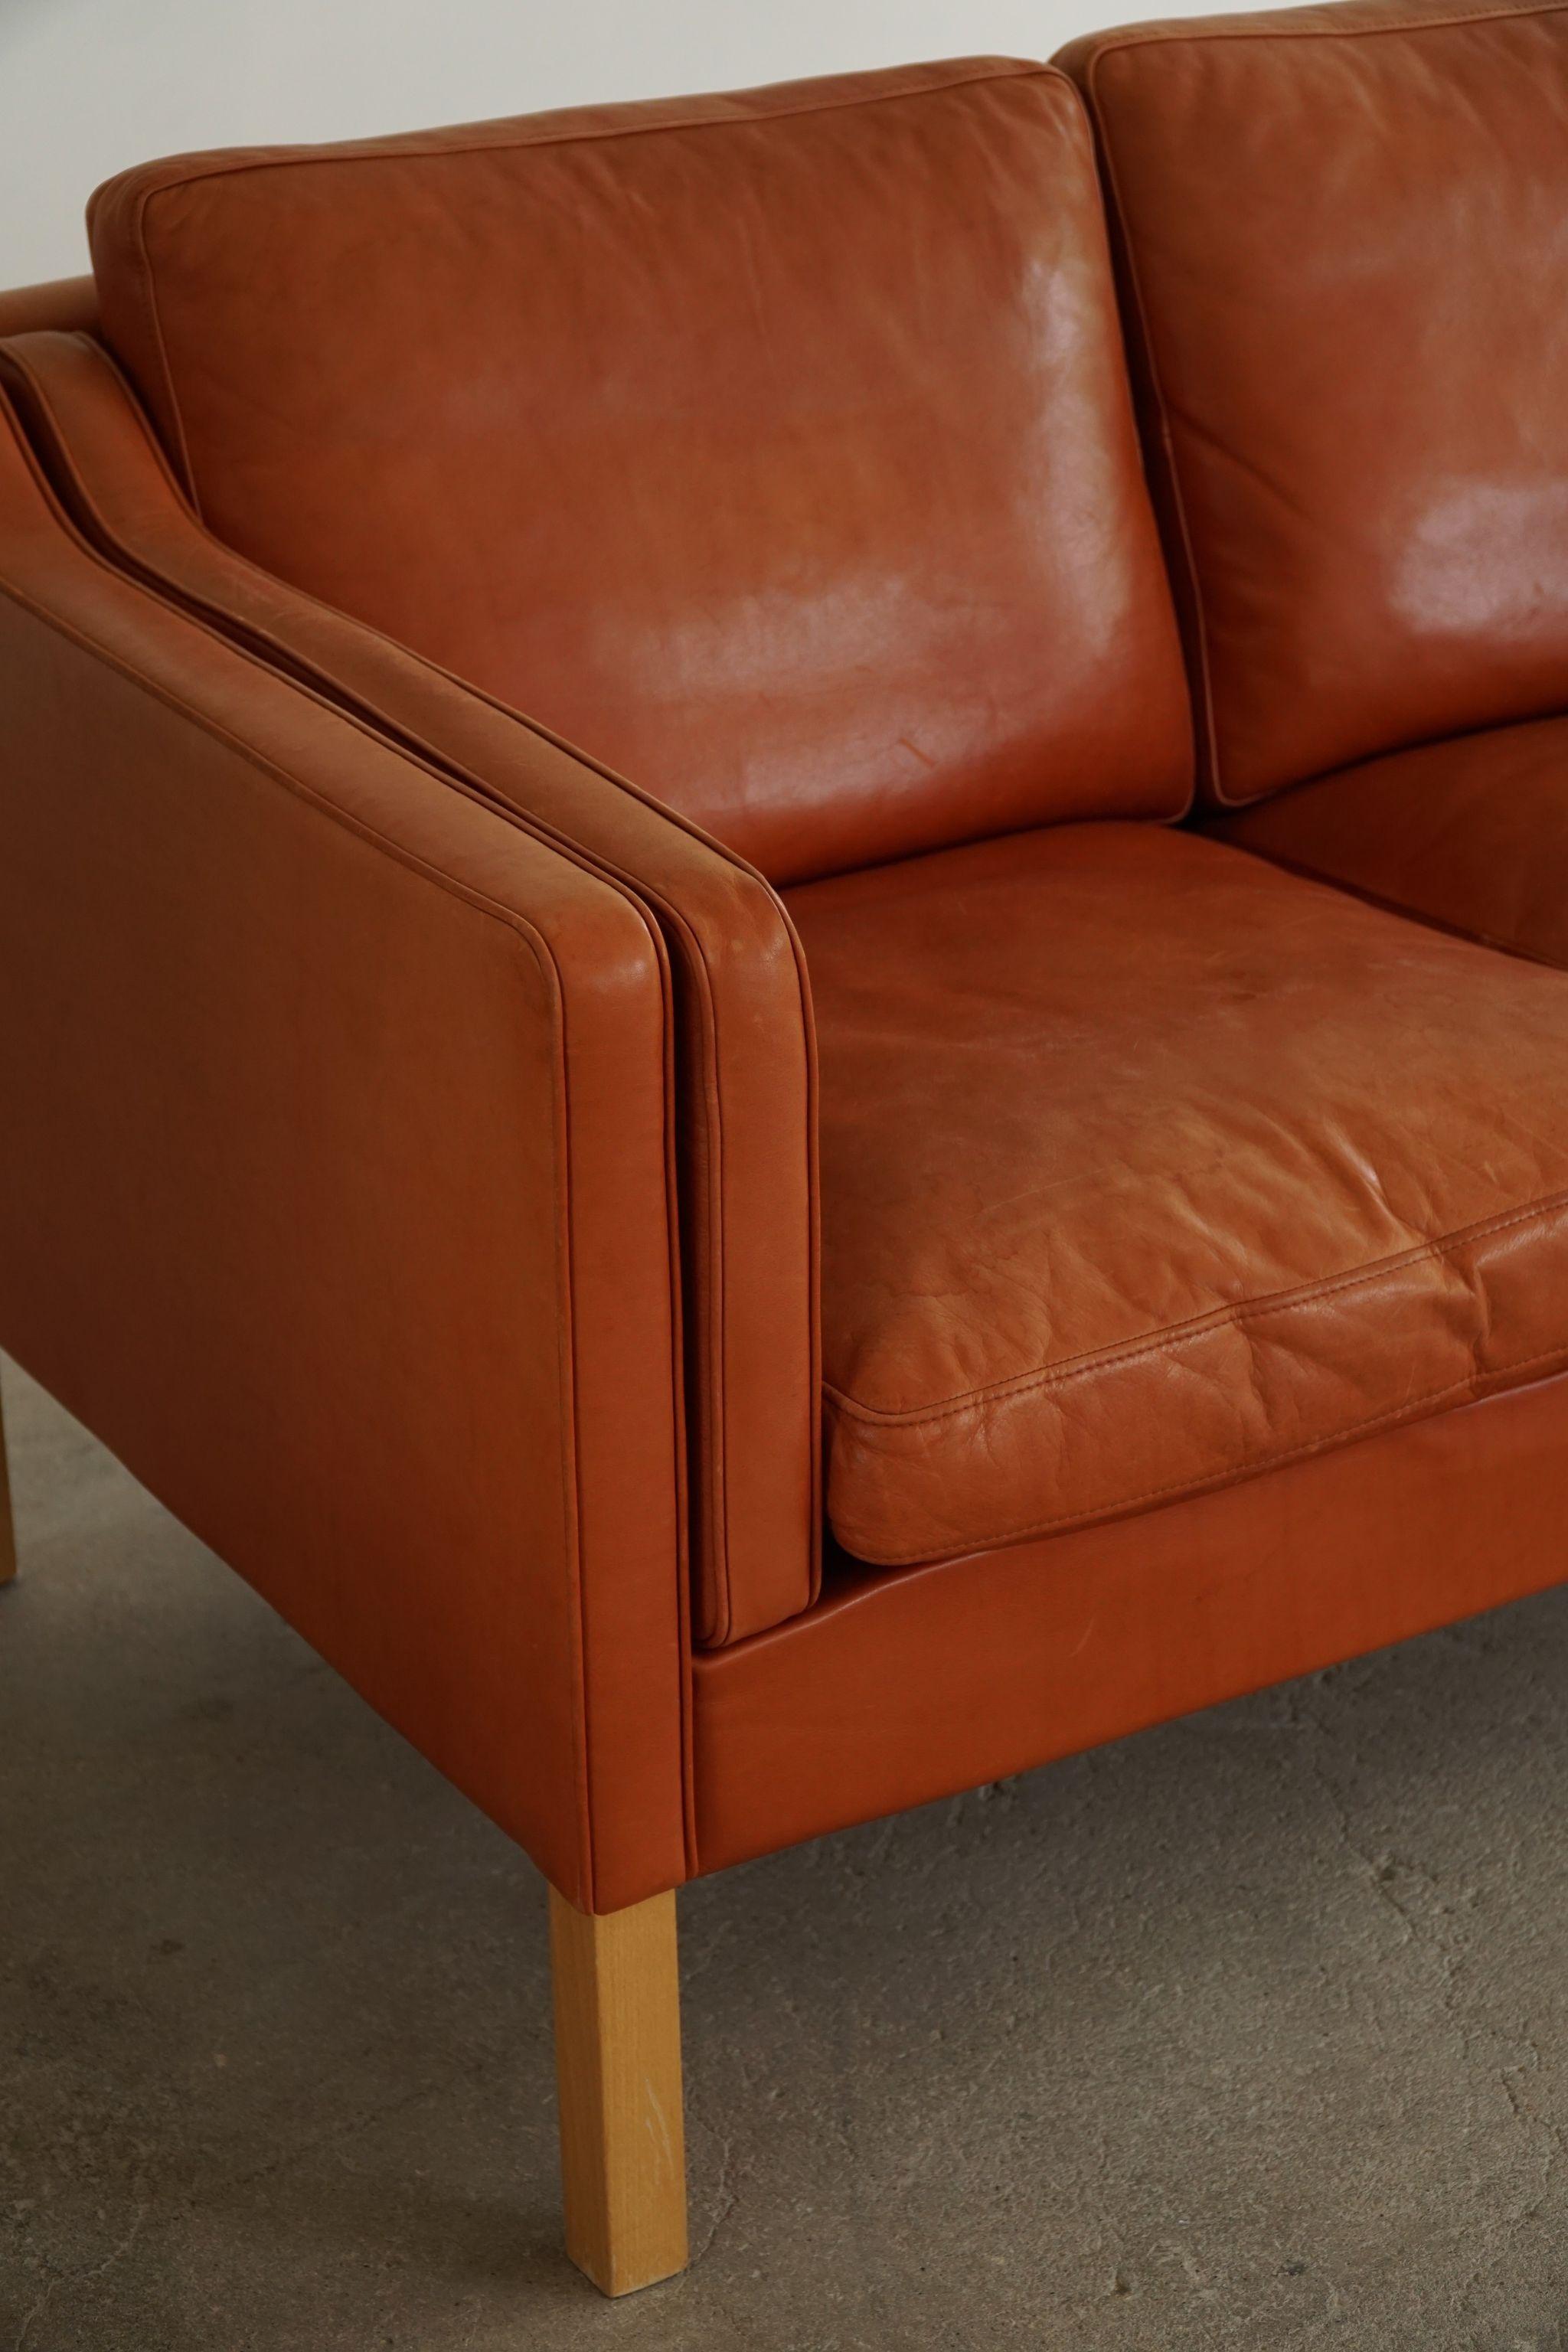 A classic Danish Mordern 2-seater sofa in cognac coloured leather, feets made in solid beech. Simple lines and a great warm patina featured in this sofa. 

With a heavy focus on functionality, this design style leans toward modernism, while